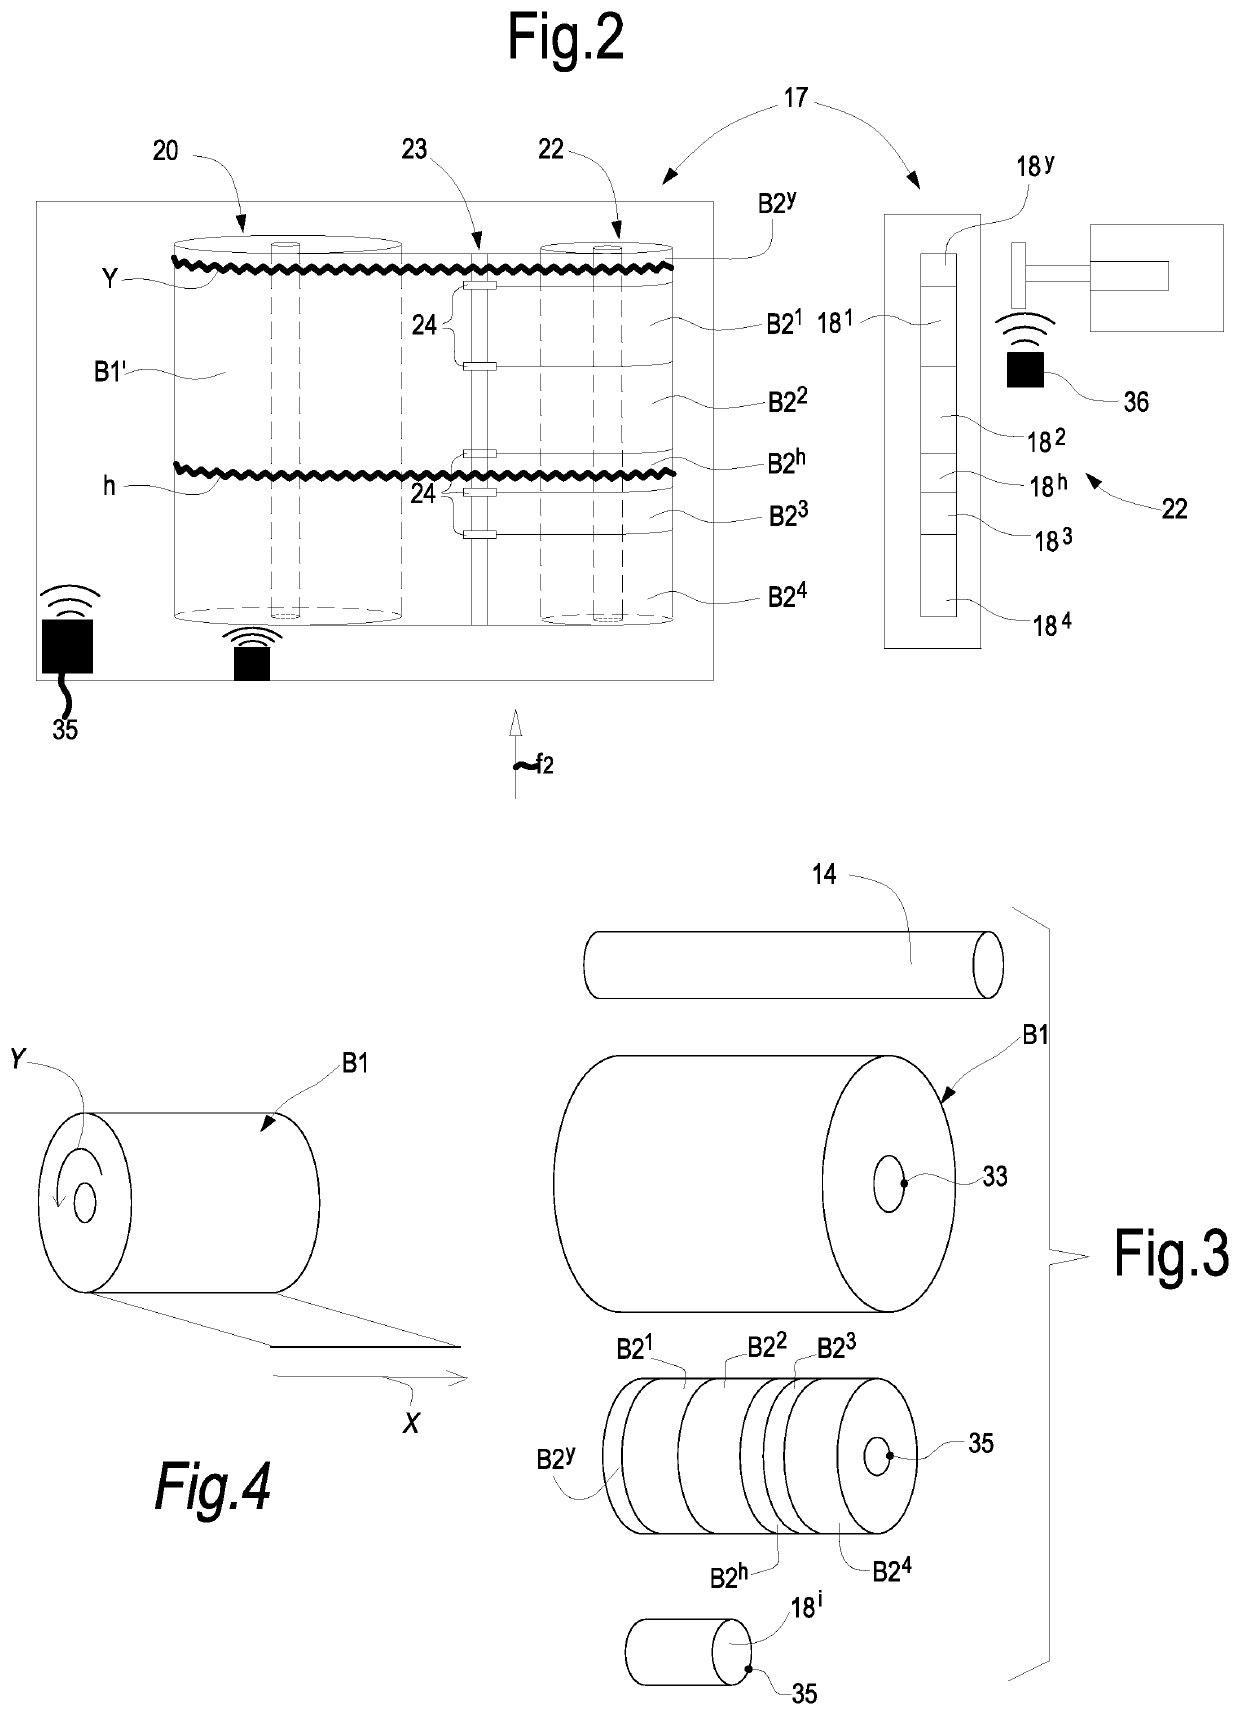 Method for predicting the presence of product defects during an intermediate processing step of a thin product wound in a roll